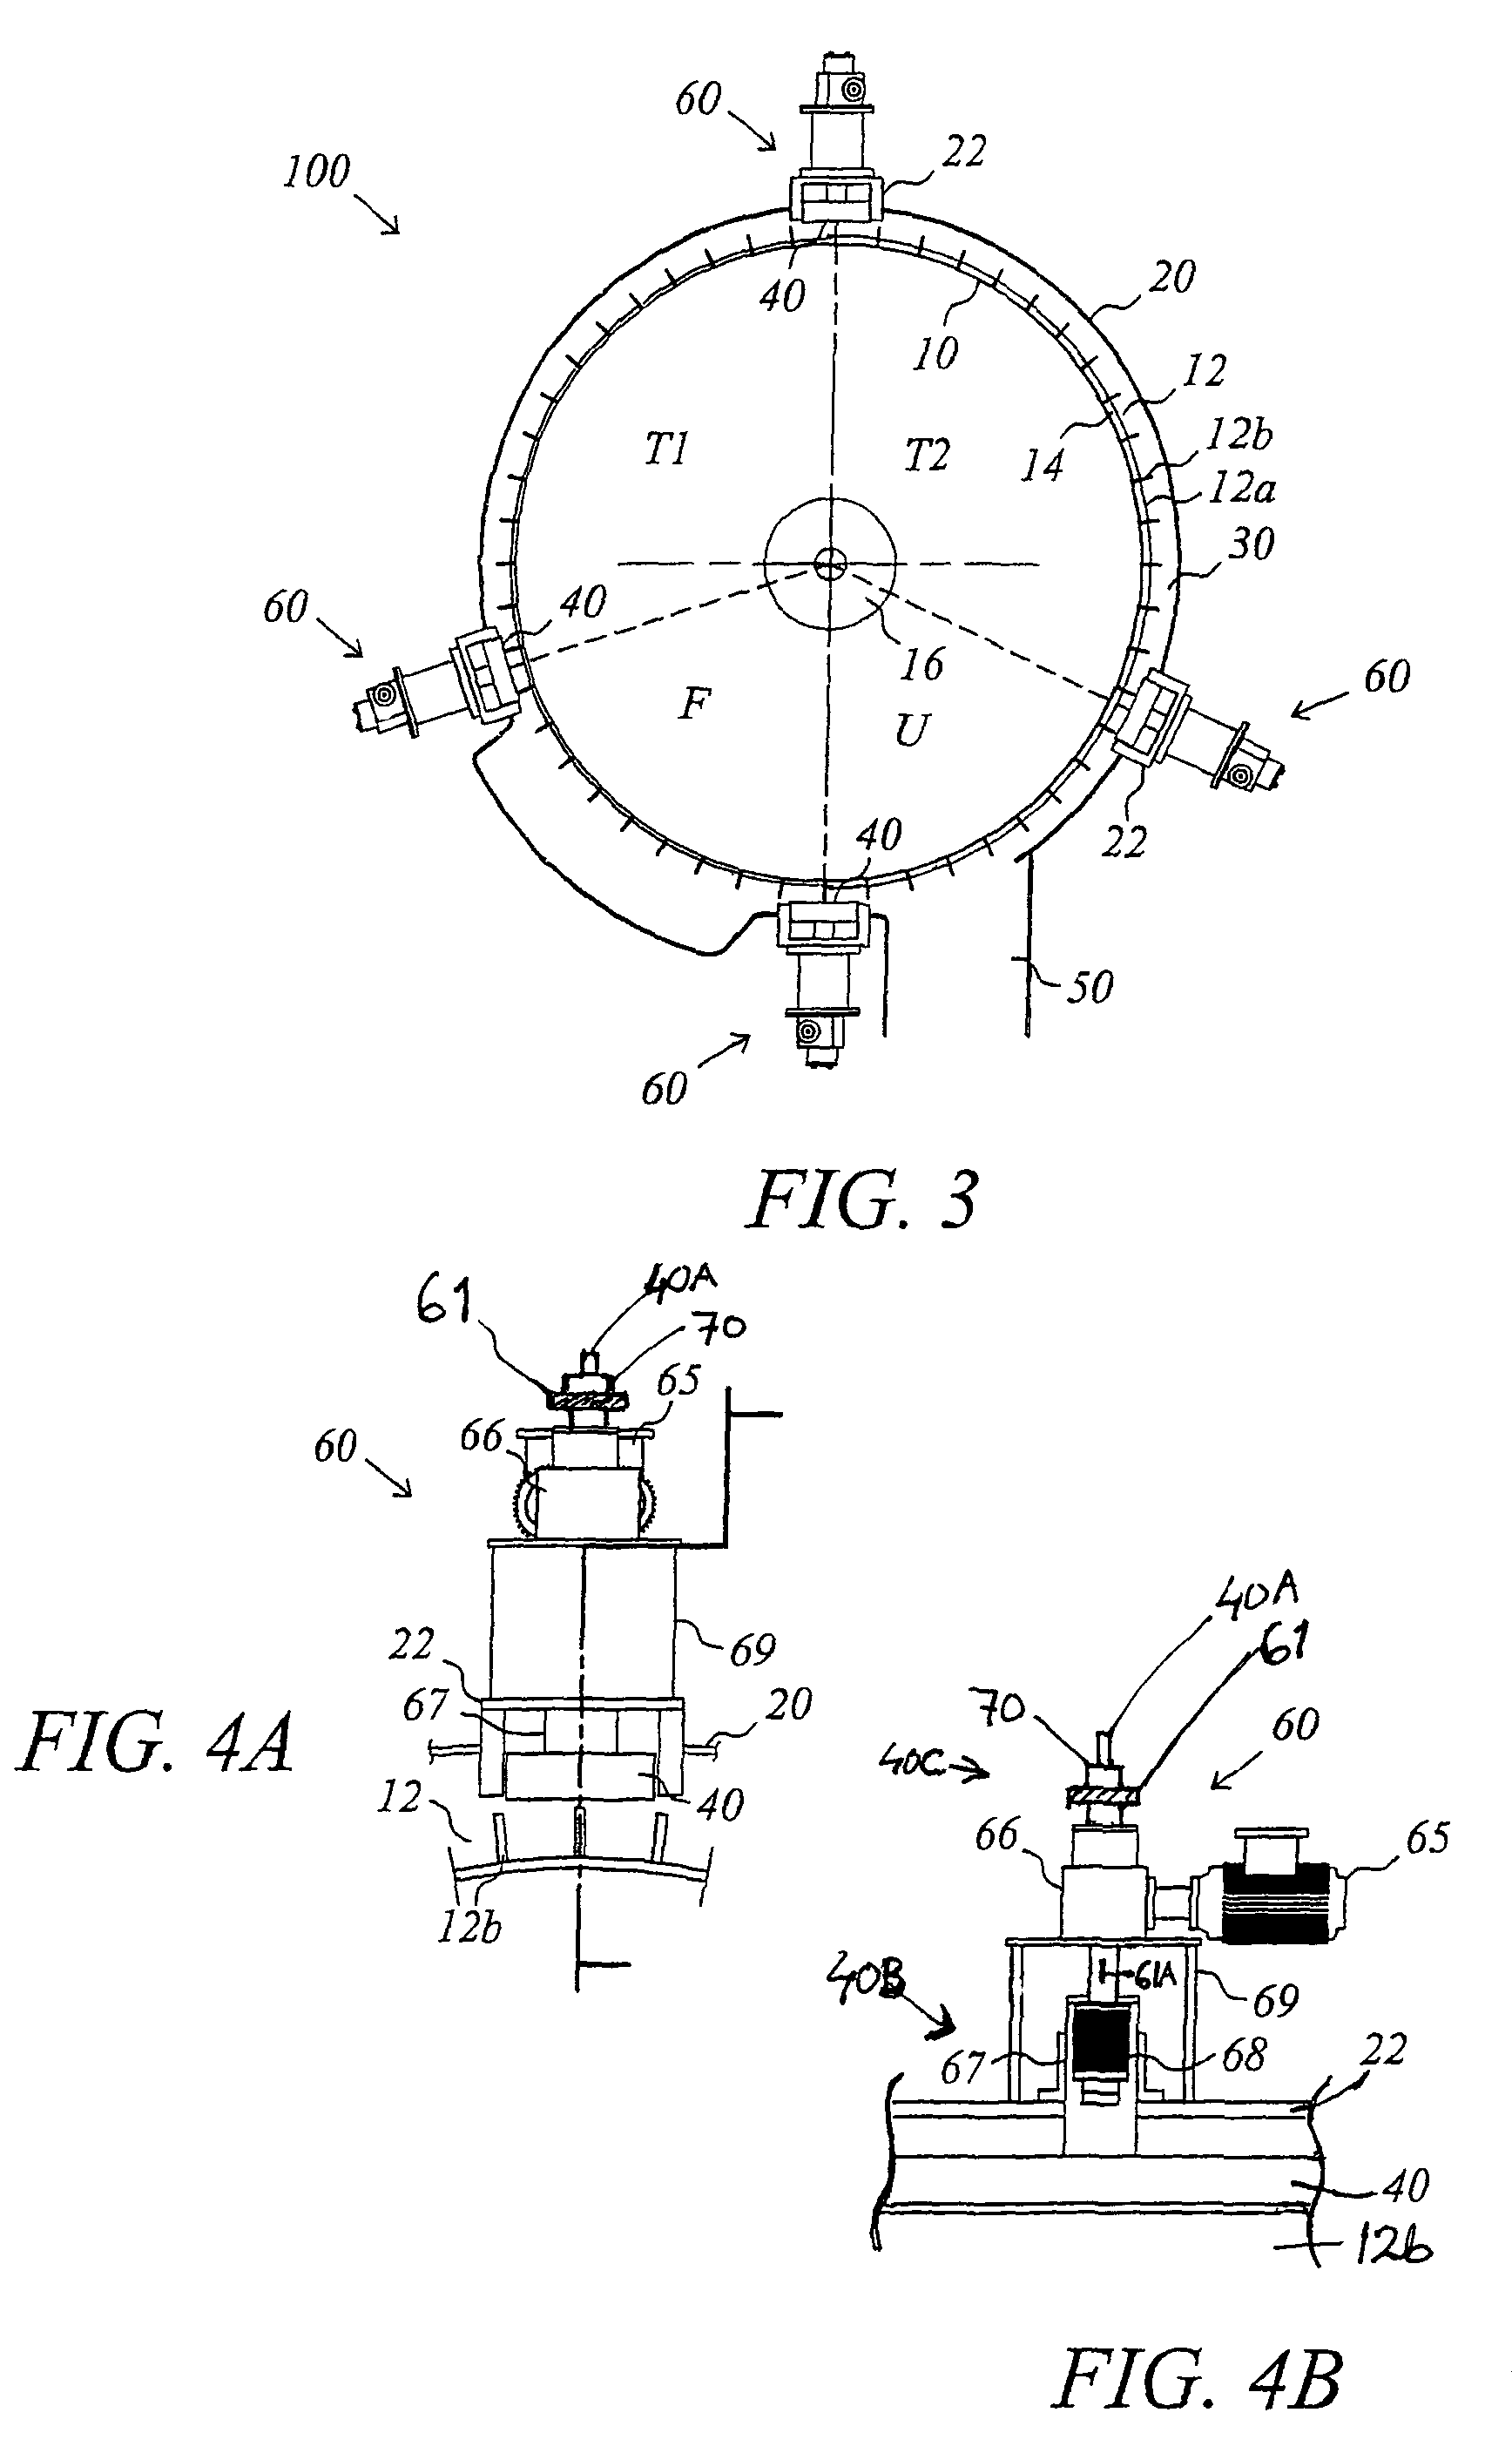 Apparatus and method for treatment of pulp